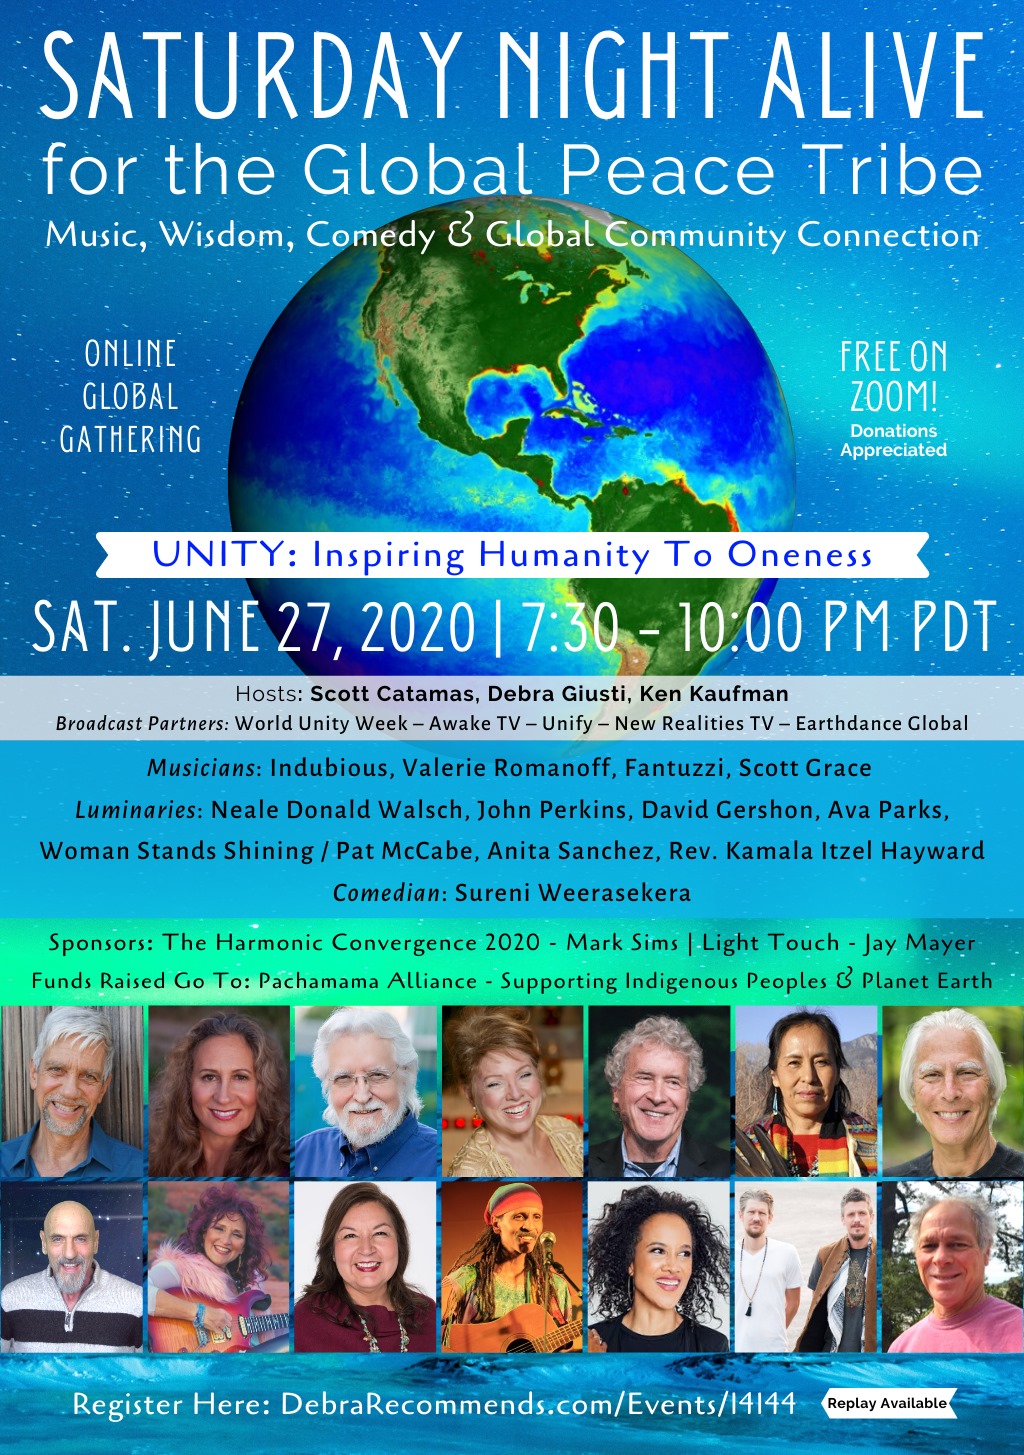 Valerie joins The Panel for Saturday Night Alive for the Global Peace Tribe